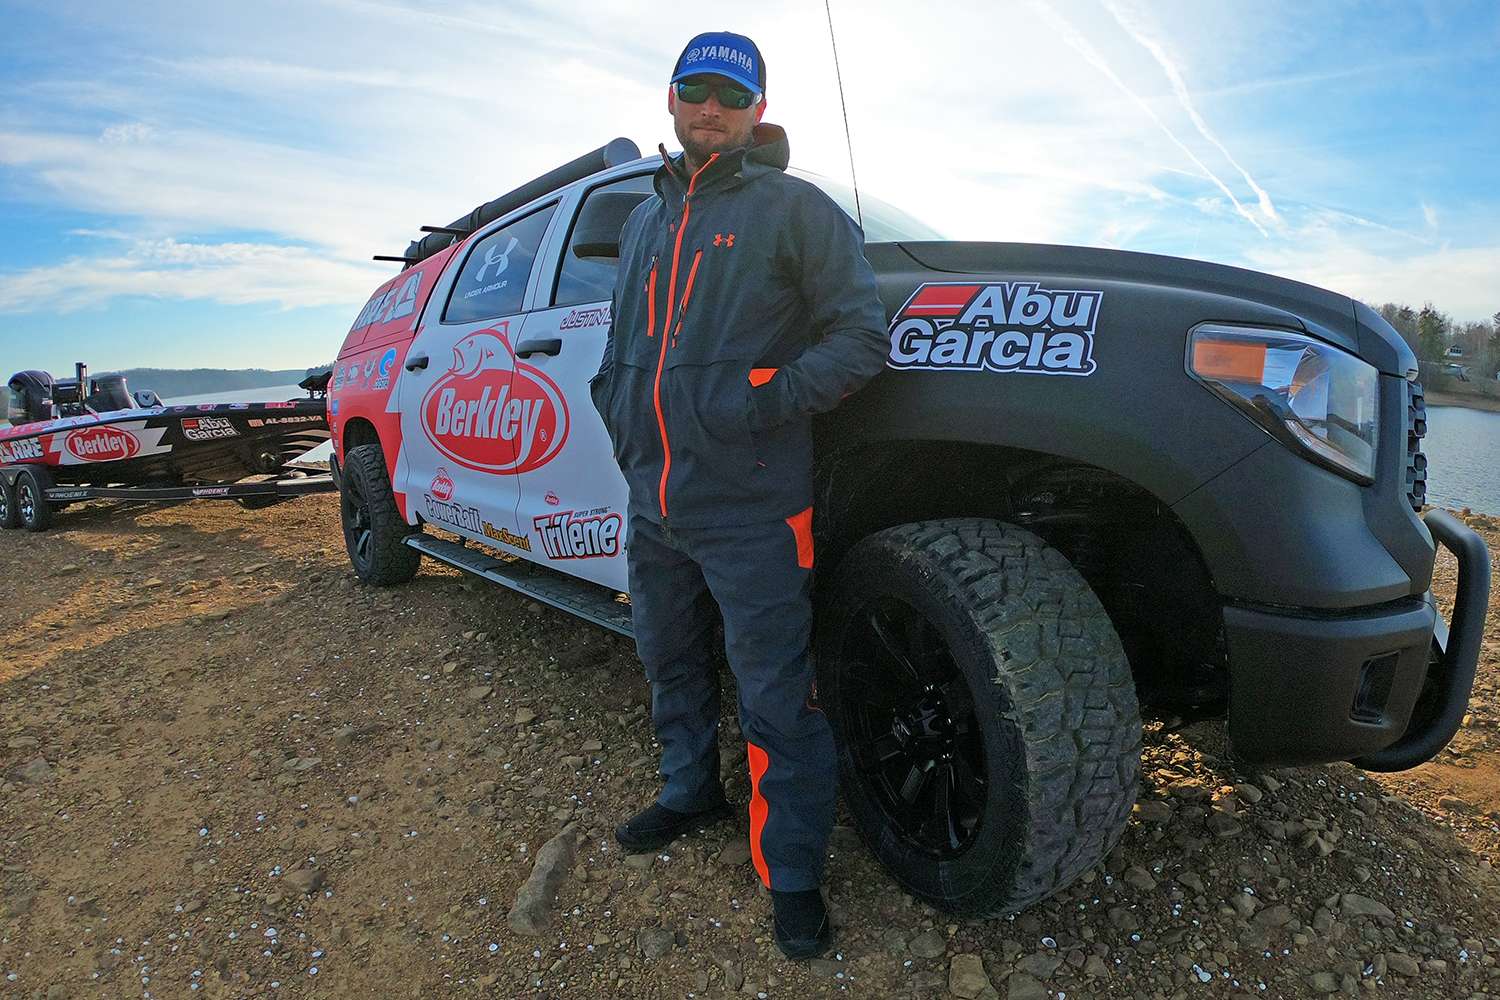 Before we dig into his boat, here's a quick go-round with his 2018 Toyota Tundra.